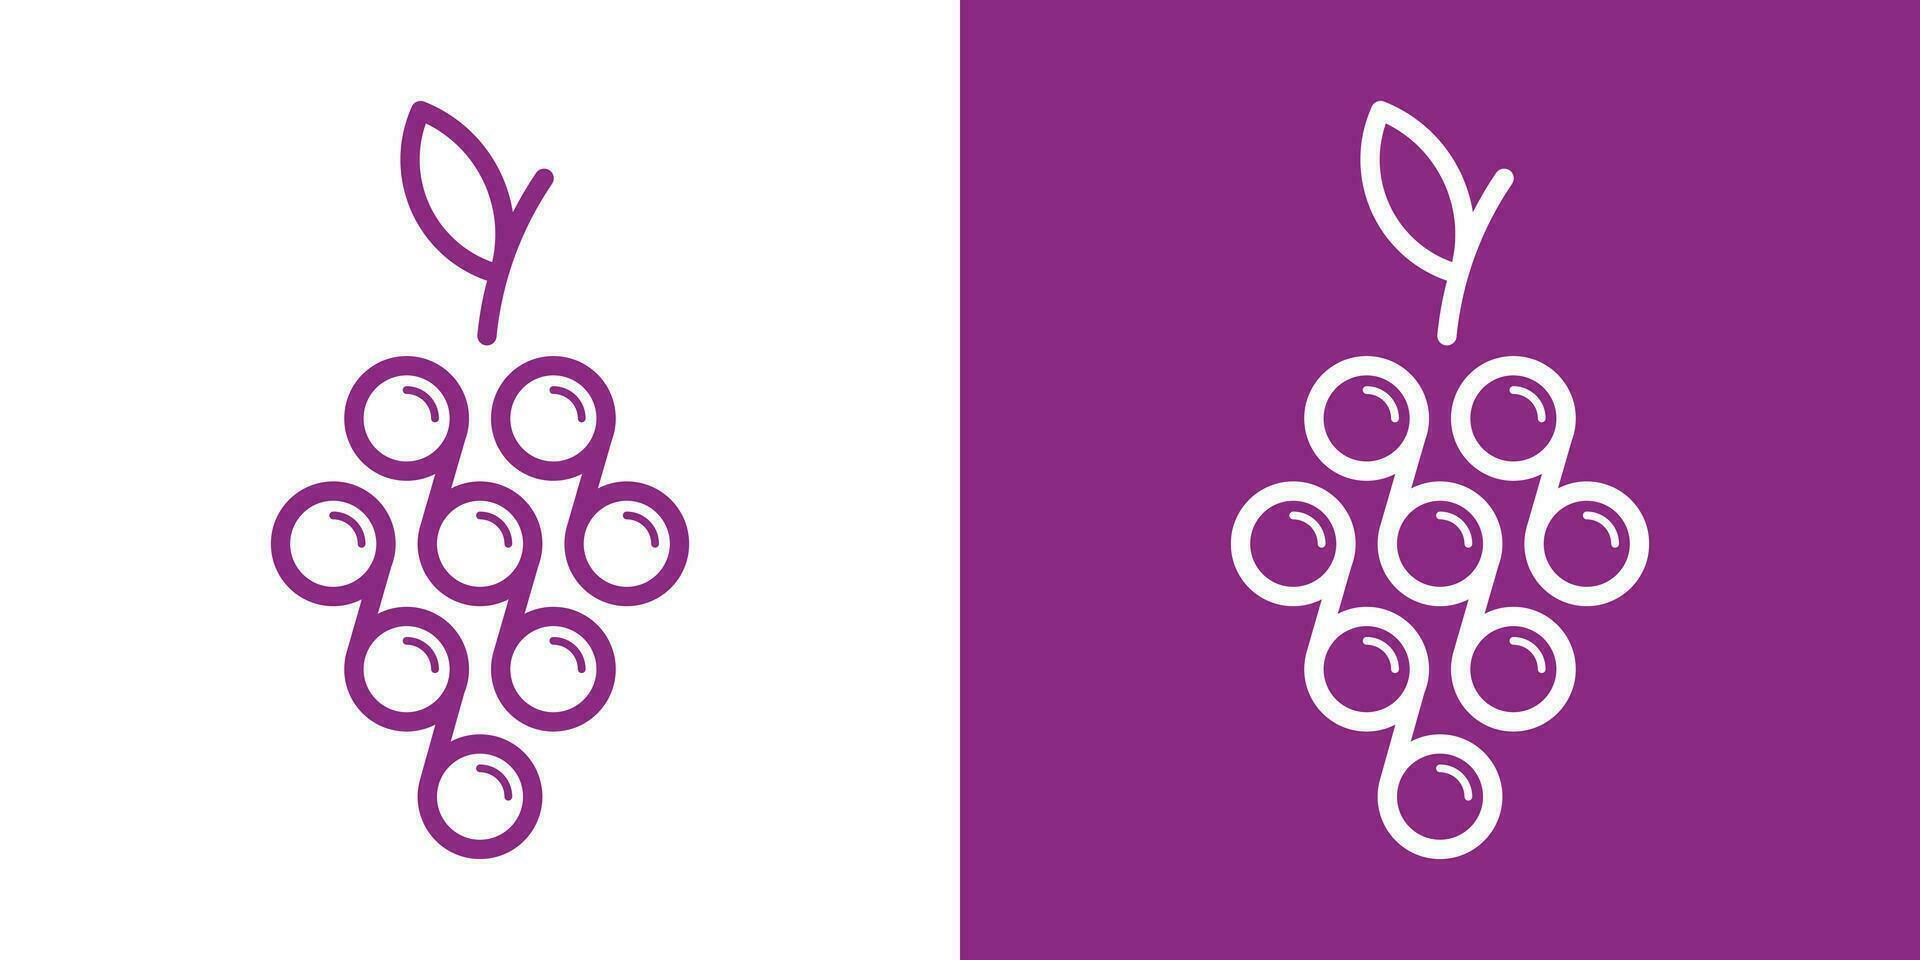 grapefruit logo design connected to infinity and made in line style vector